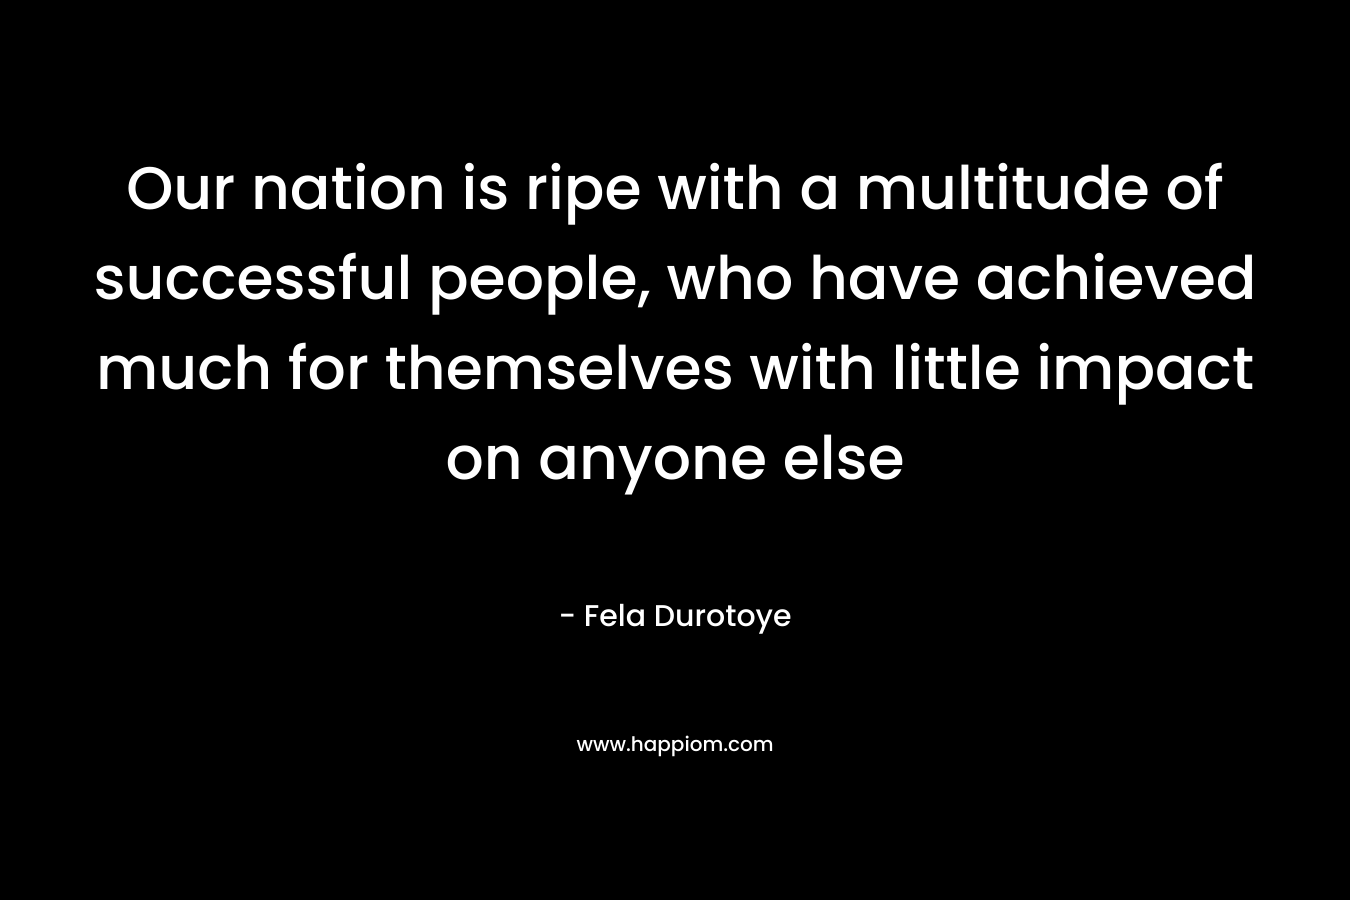 Our nation is ripe with a multitude of successful people, who have achieved much for themselves with little impact on anyone else – Fela Durotoye